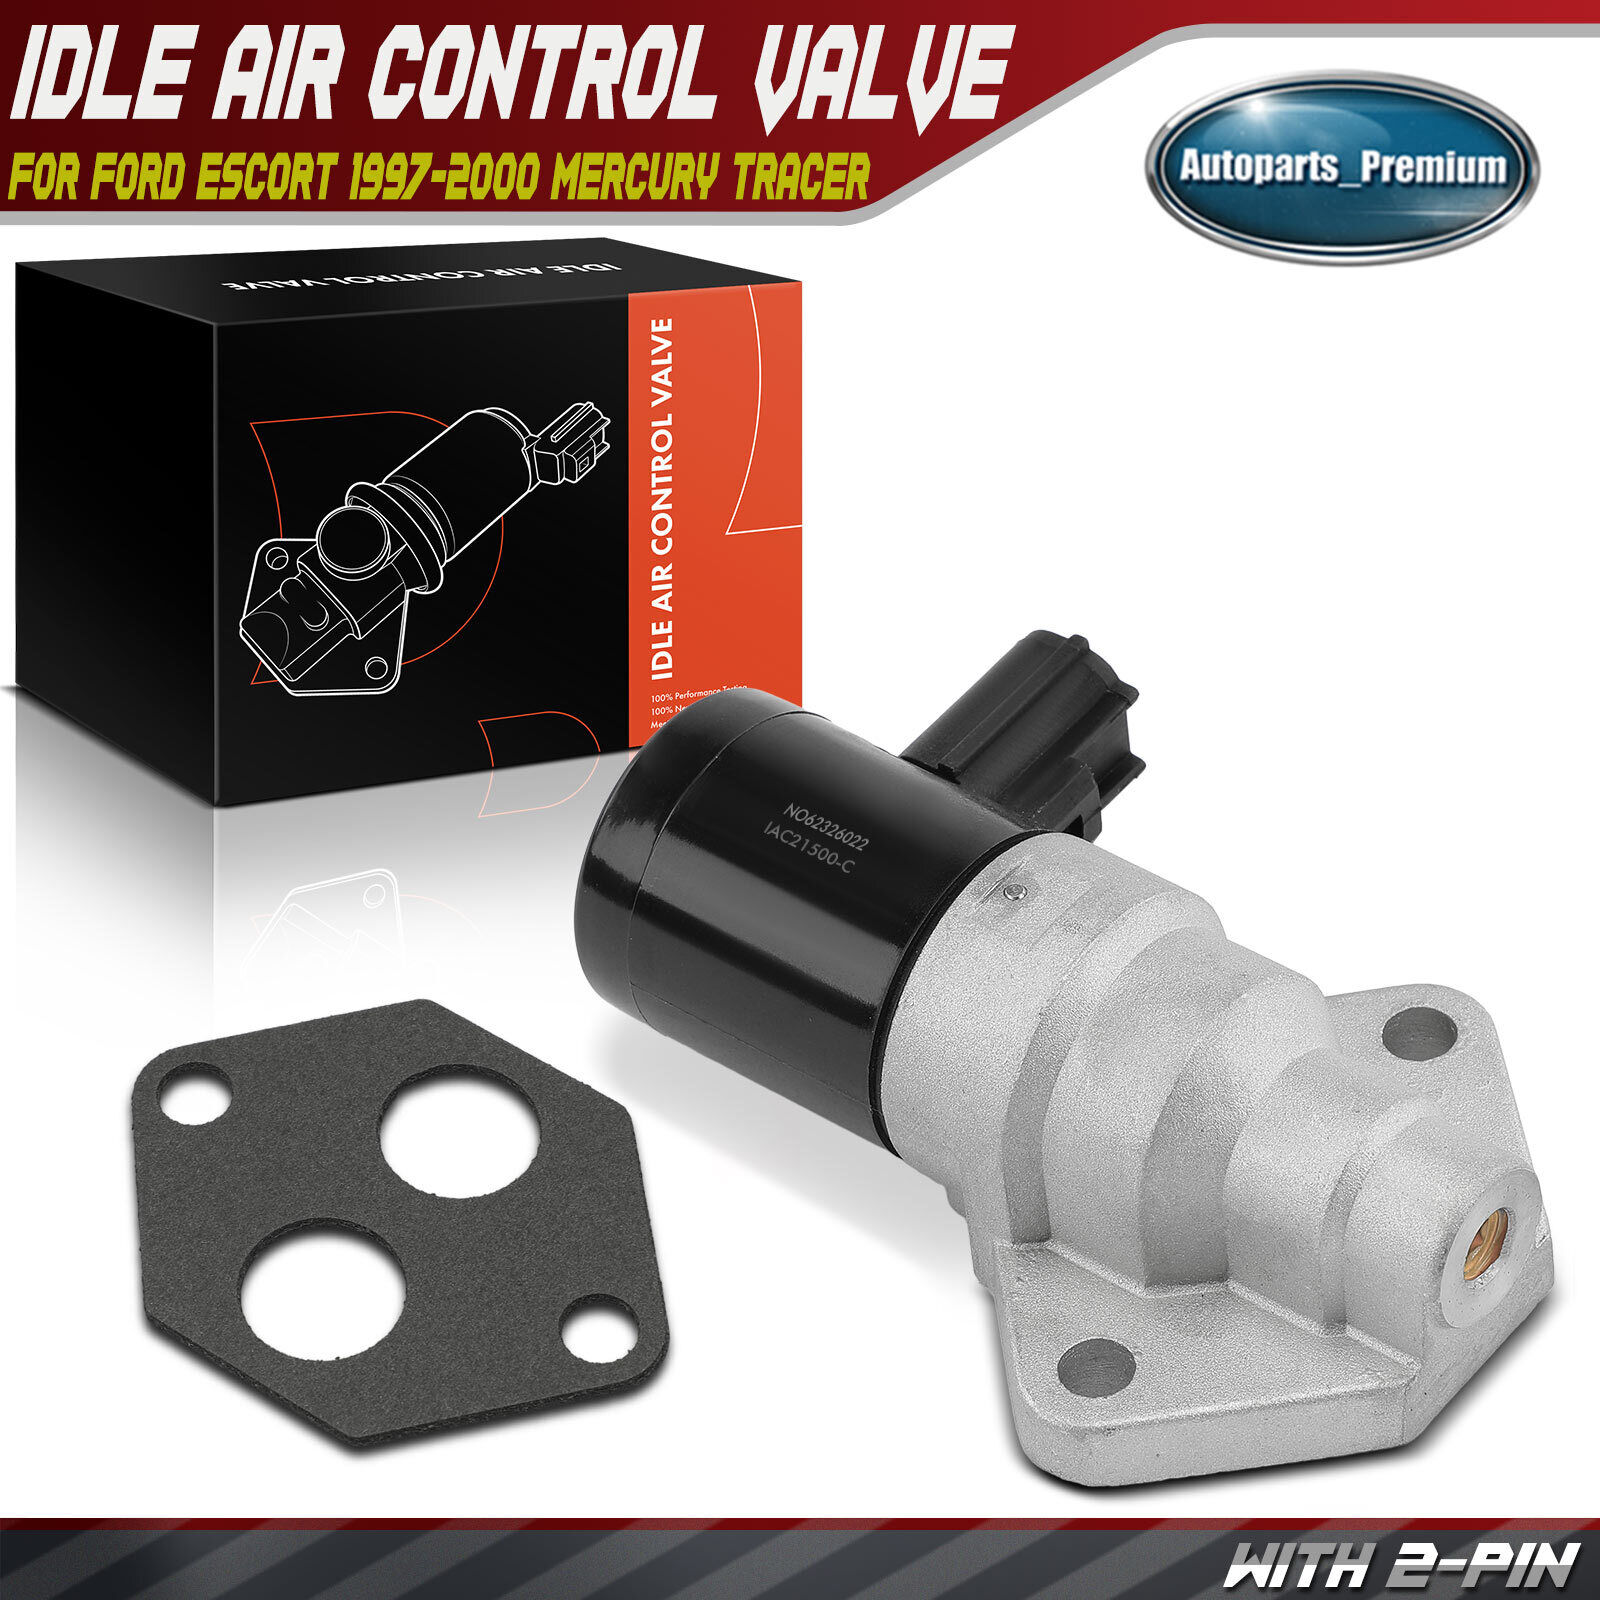 Idle Air Control Valve for Ford Escort 1997-2000 Mercury Tracer 1997-1999 2.0L